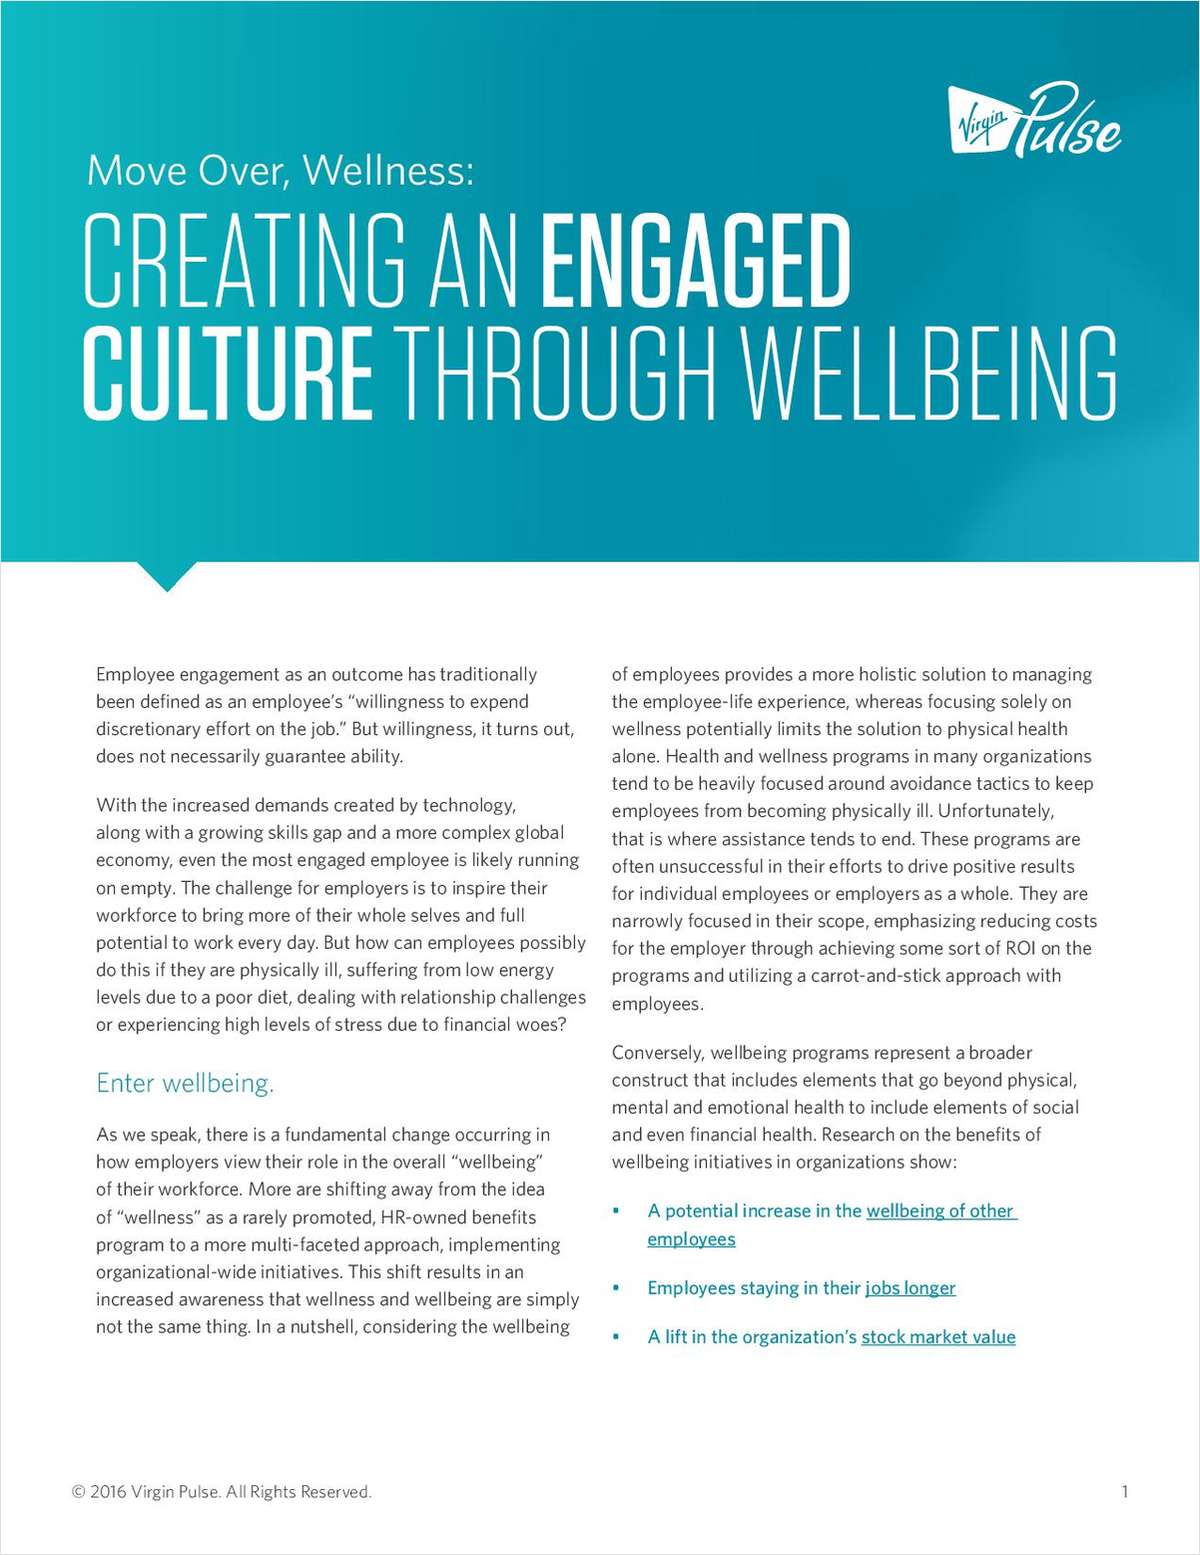 Creating a Culture of Wellbeing